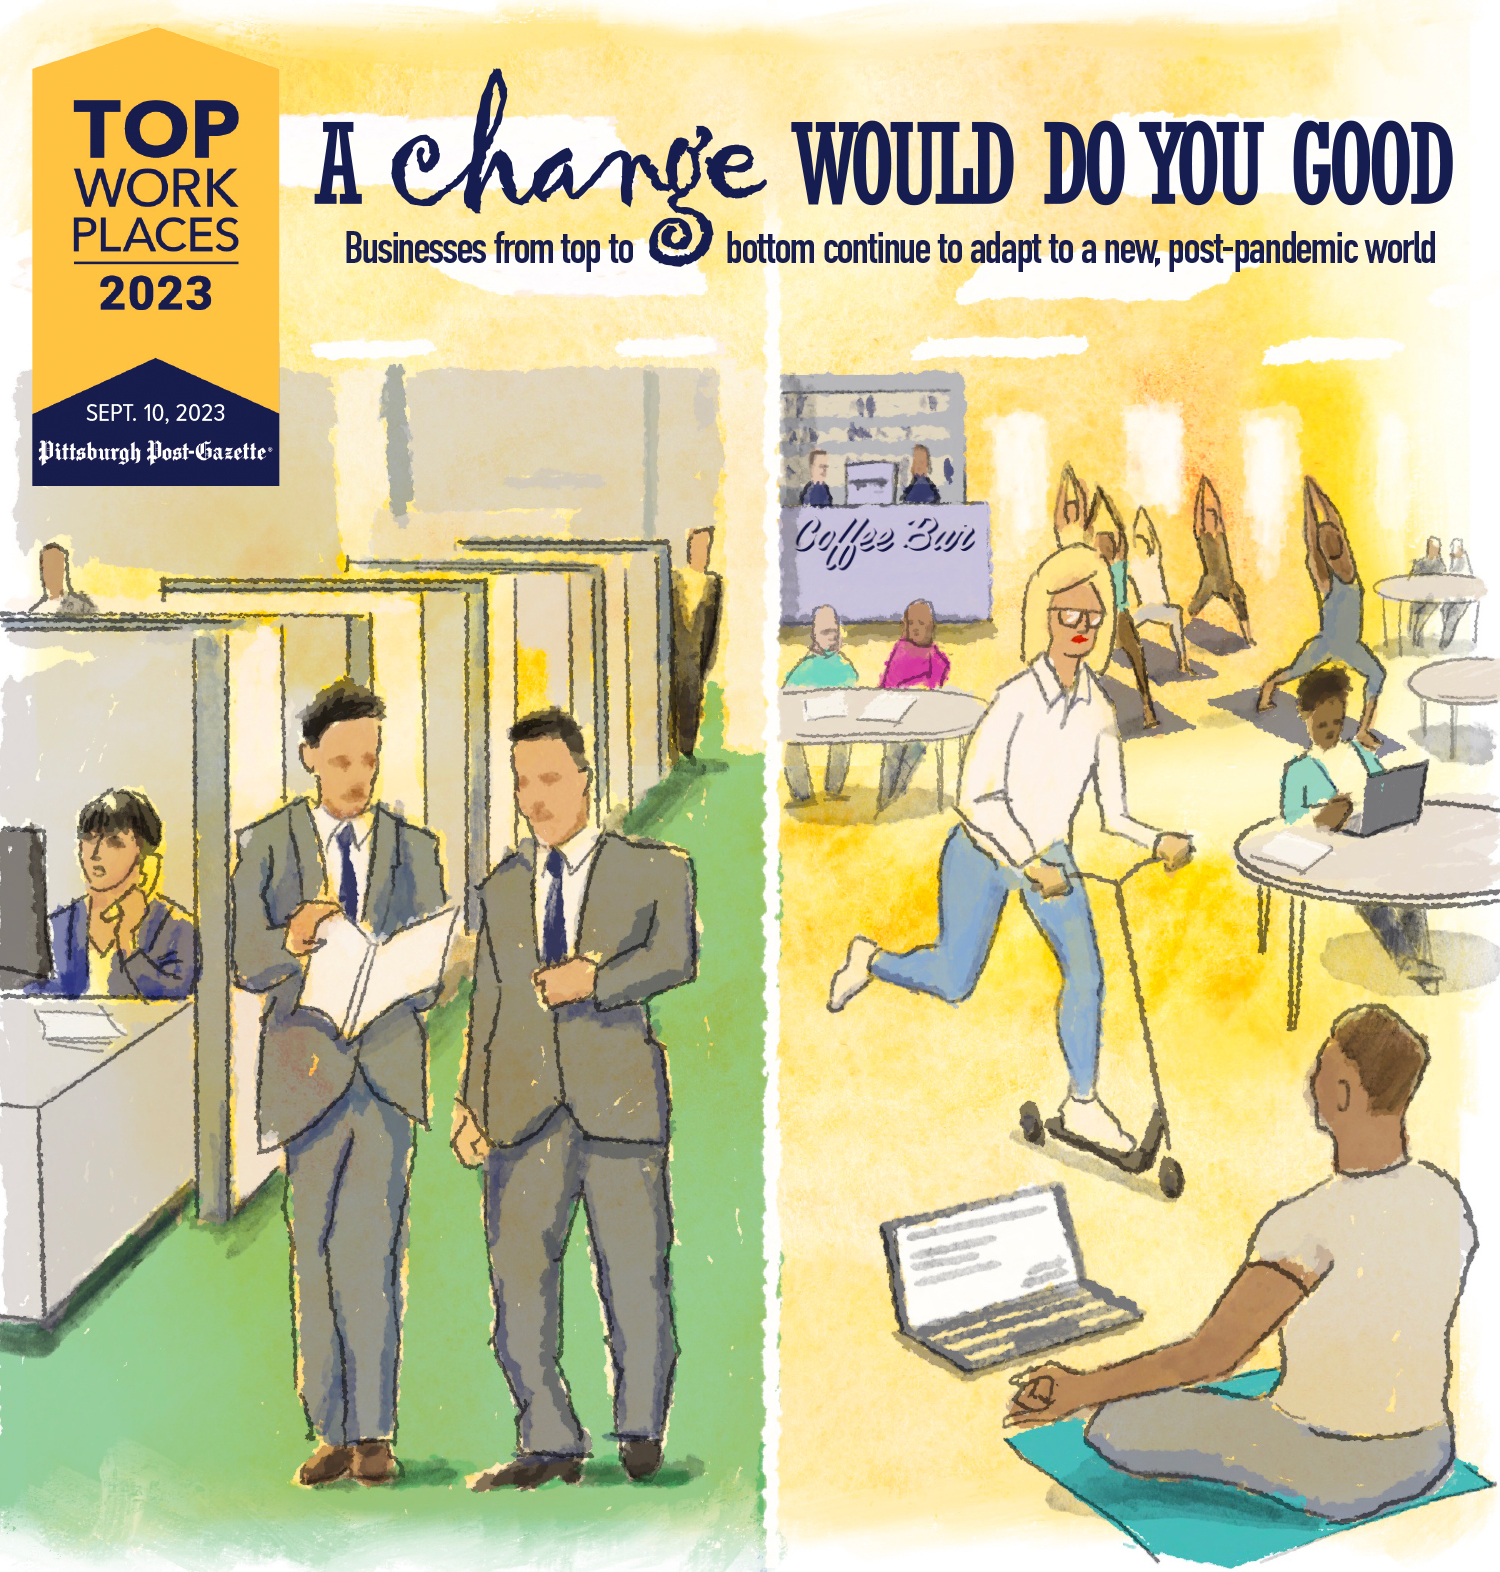 Top workplaces 2023: A change would do you good